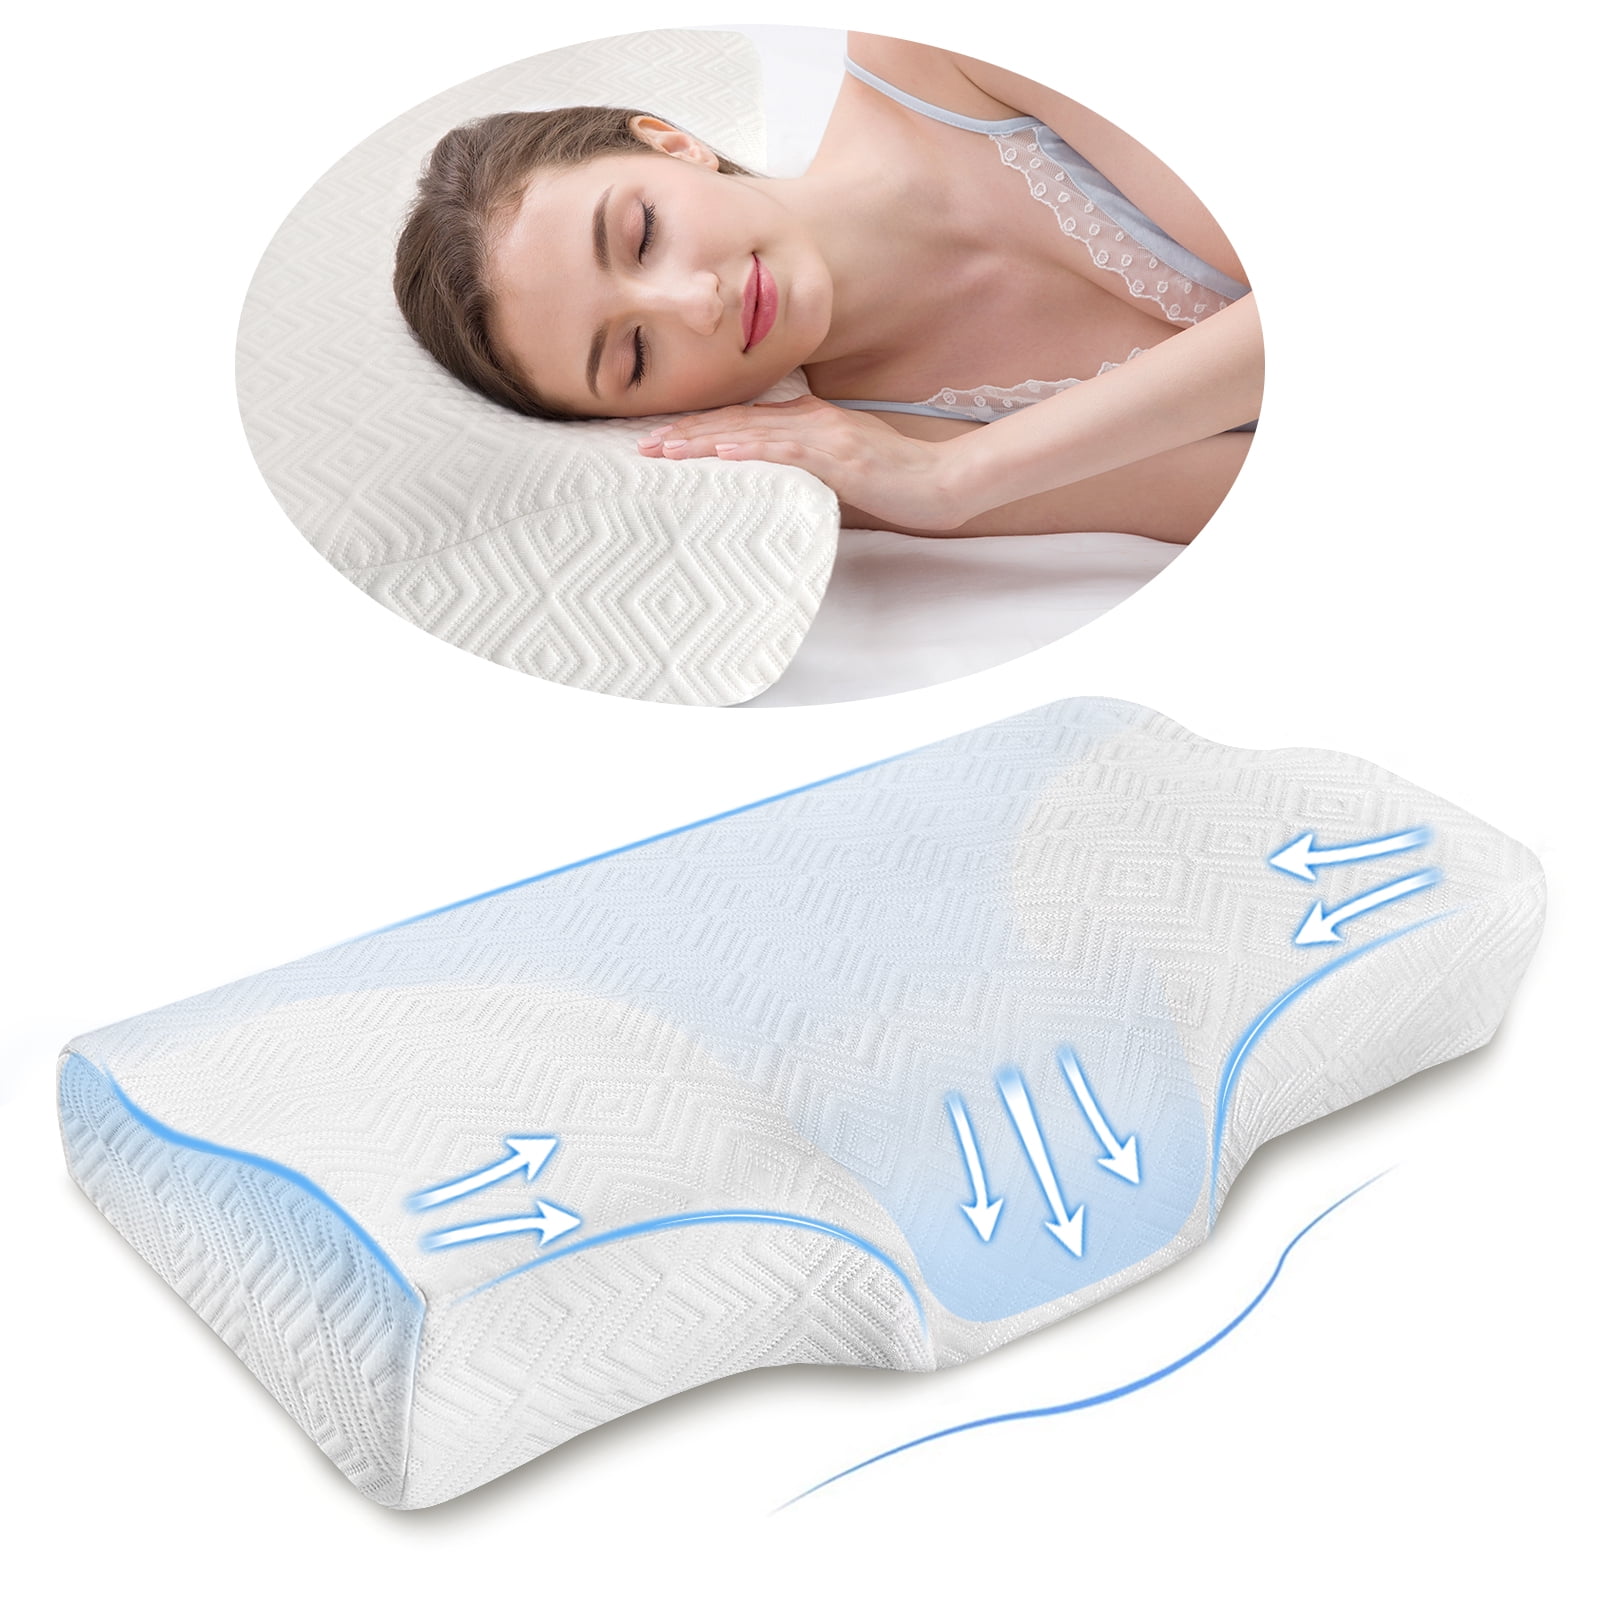 Power Of Nature Memory Foam Orthopedic Pillow Cervical Bed Pillow for Neck Pain Ergonomic Contour Pillow for Side Back Stomach Sleepers 65 x 40 x 7/11cm 